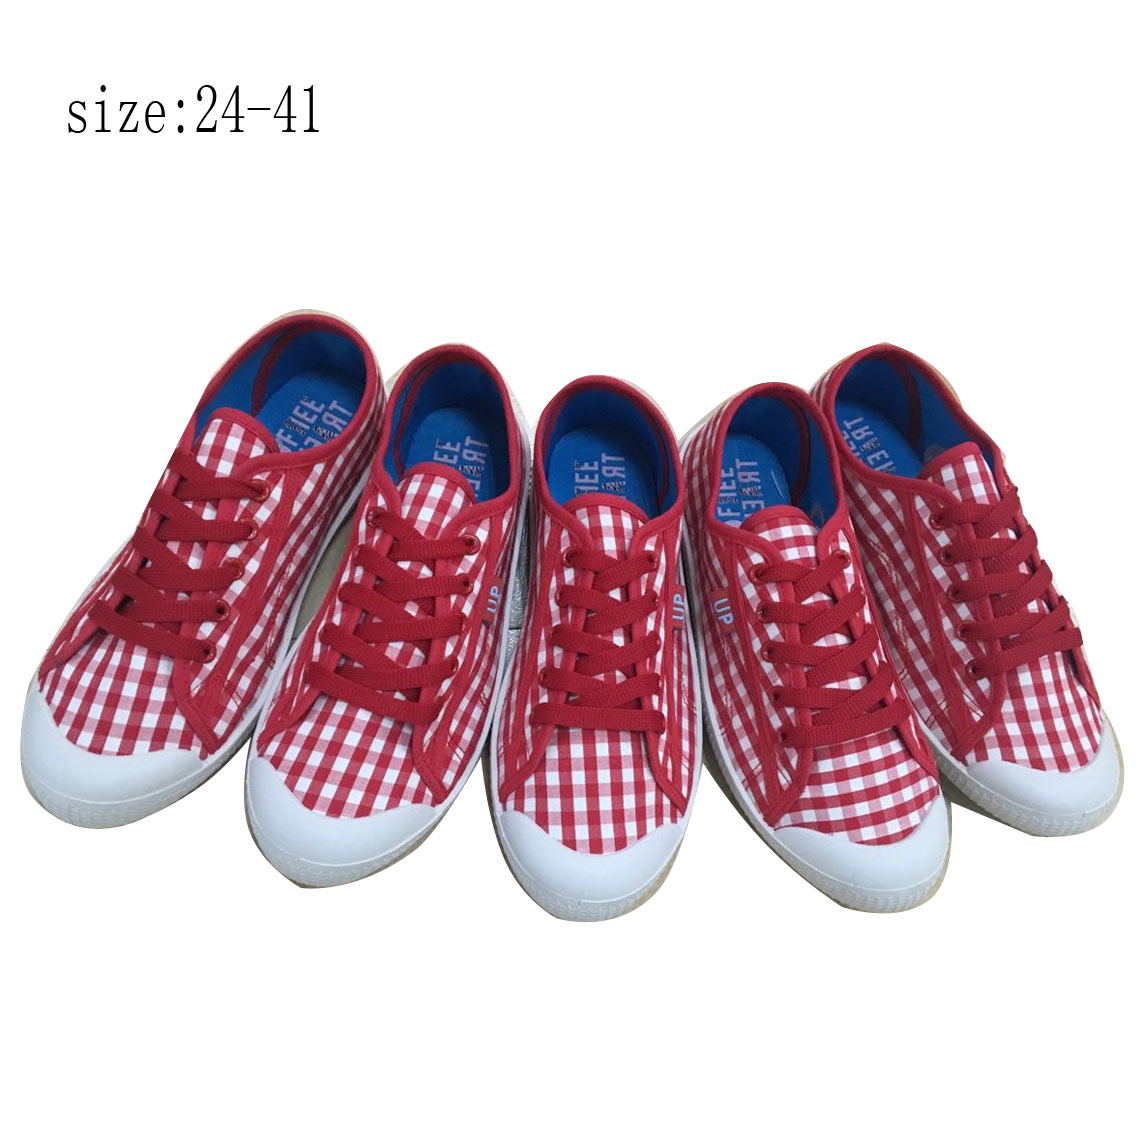 New design women casual shoes canvas shoes (HP19517-7) 1. ITEM...